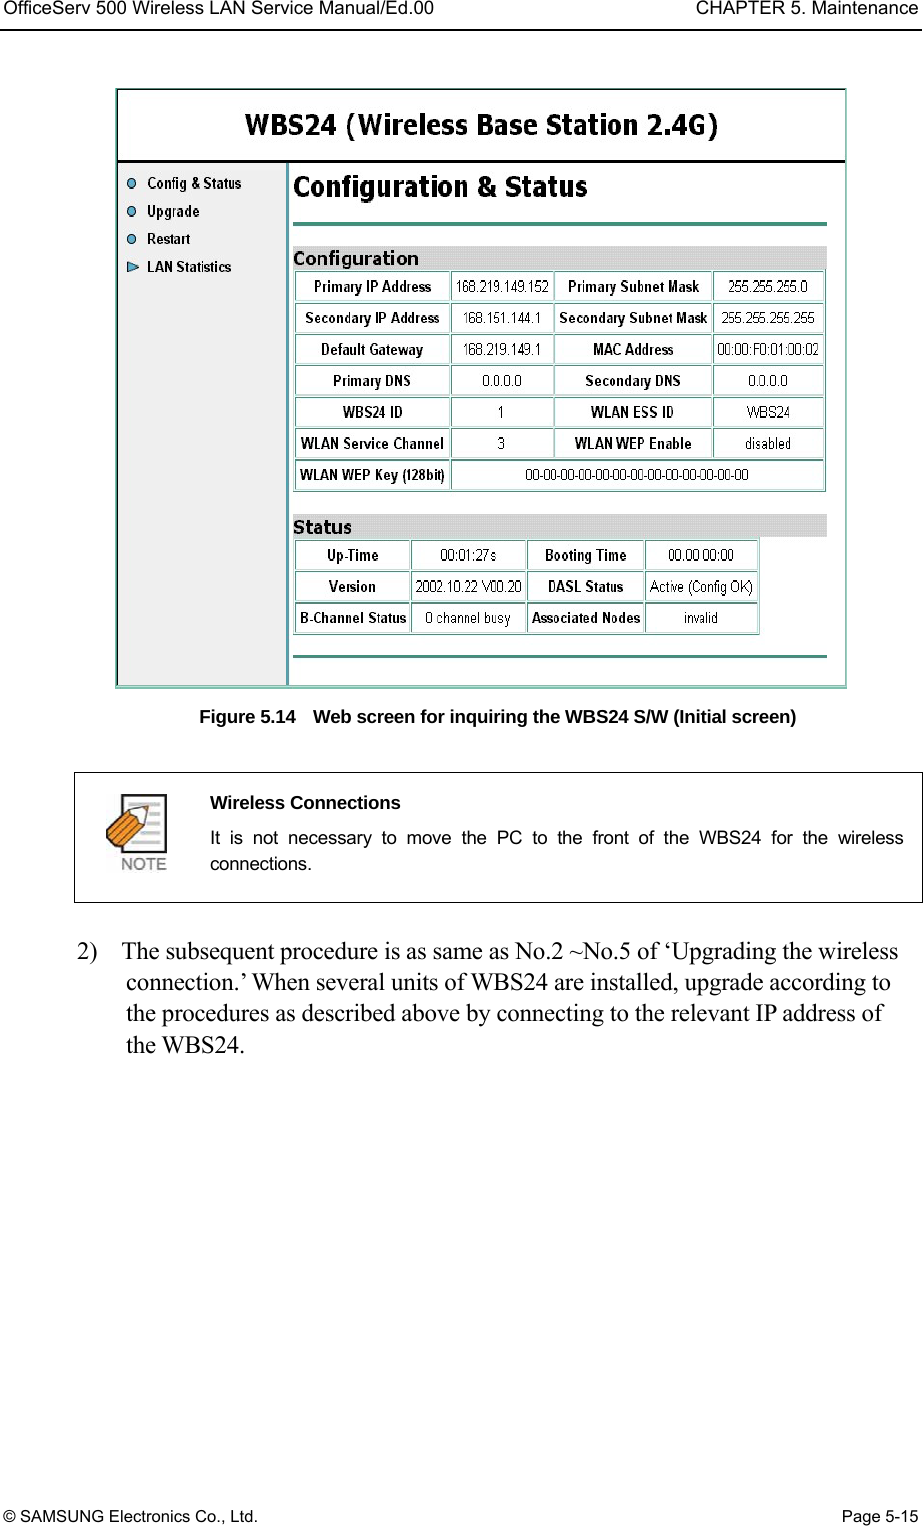 OfficeServ 500 Wireless LAN Service Manual/Ed.00  CHAPTER 5. Maintenance © SAMSUNG Electronics Co., Ltd.  Page 5-15 Figure 5.14    Web screen for inquiring the WBS24 S/W (Initial screen)   Wireless Connections   It is not necessary to move the PC to the front of the WBS24 for the wireless connections.  2)    The subsequent procedure is as same as No.2 ~No.5 of ‘Upgrading the wireless connection.’ When several units of WBS24 are installed, upgrade according to     the procedures as described above by connecting to the relevant IP address of the WBS24.  